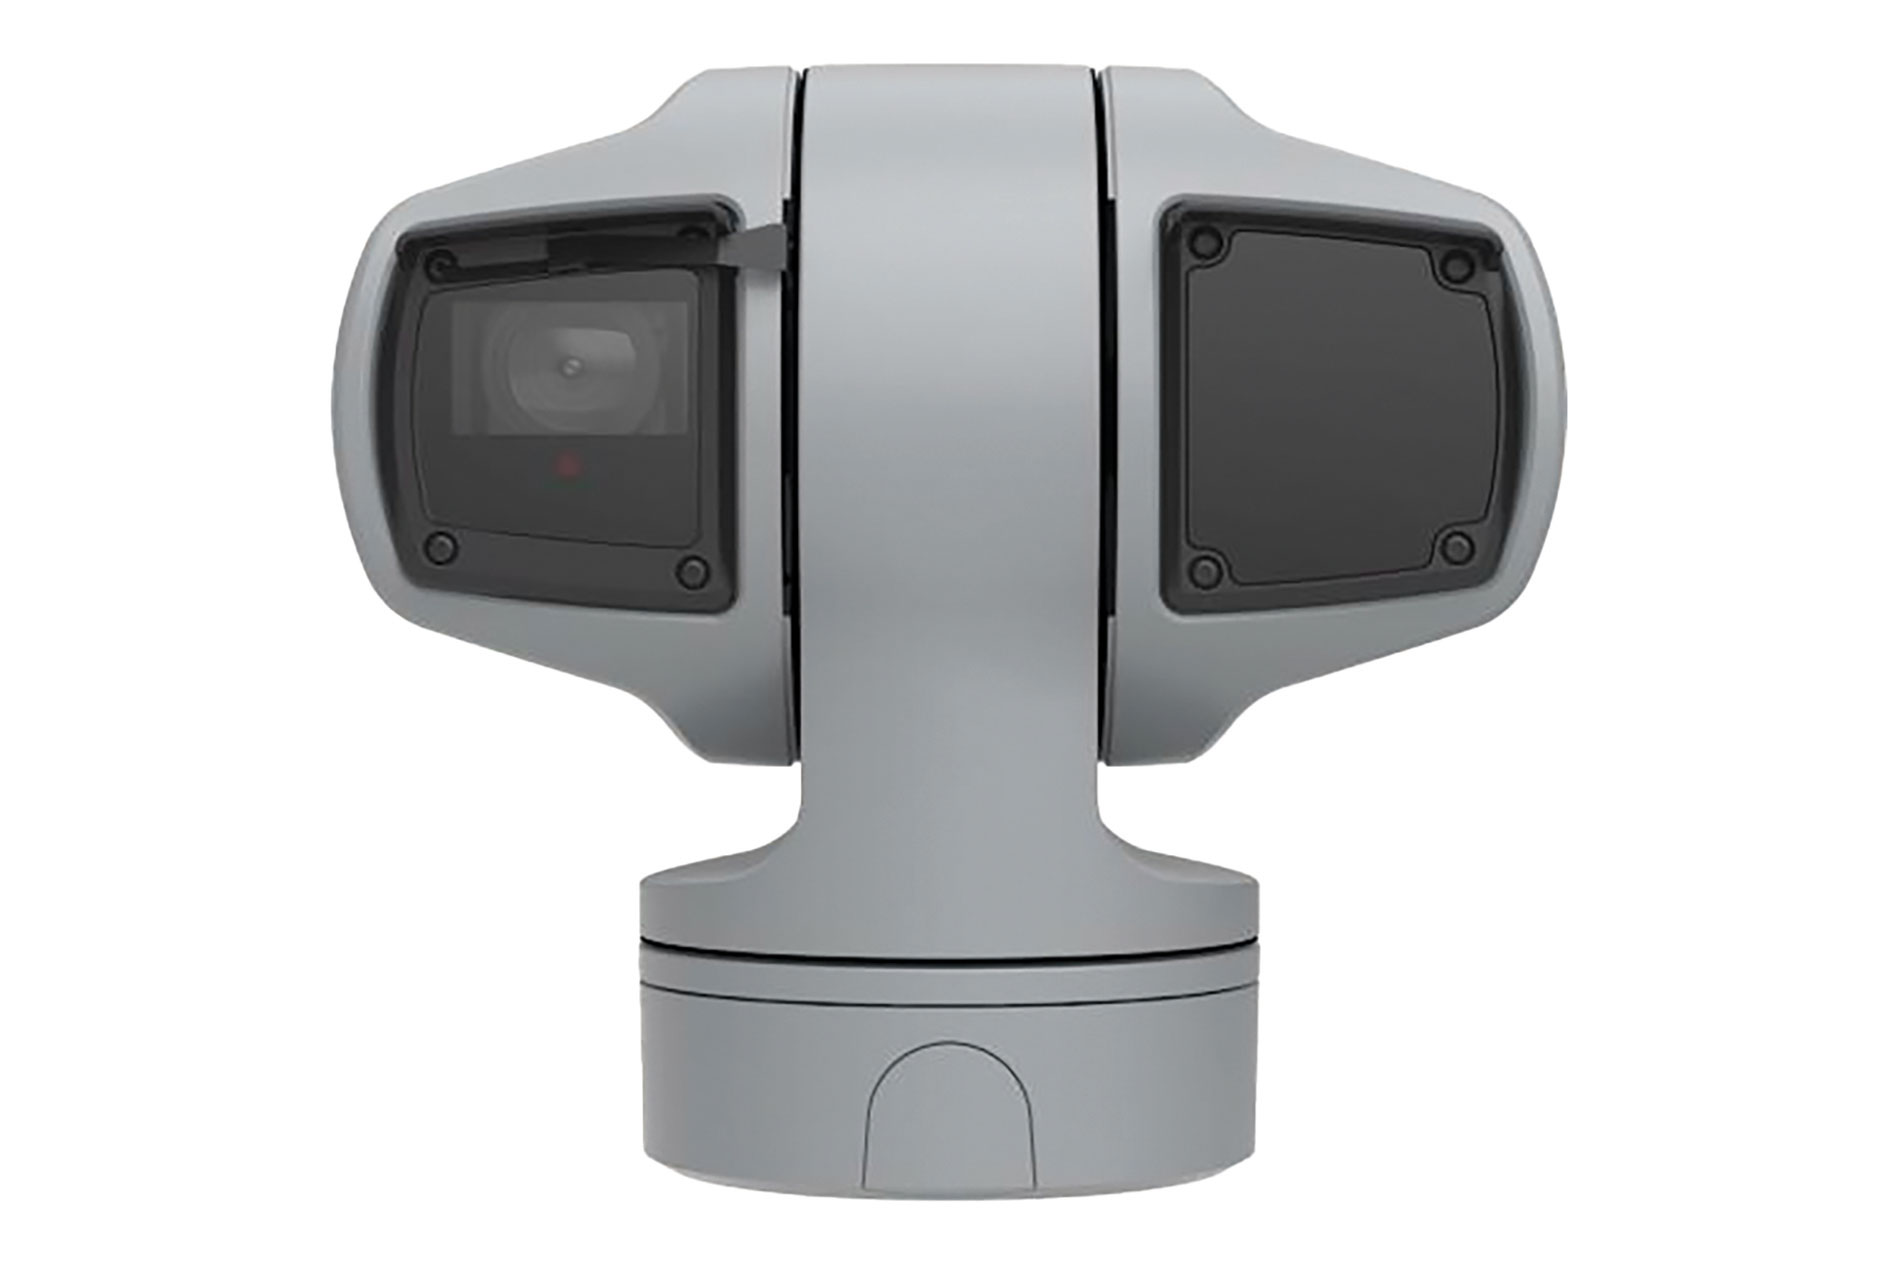 Two-sided gray camera on a swivel mount. Image by Axis.